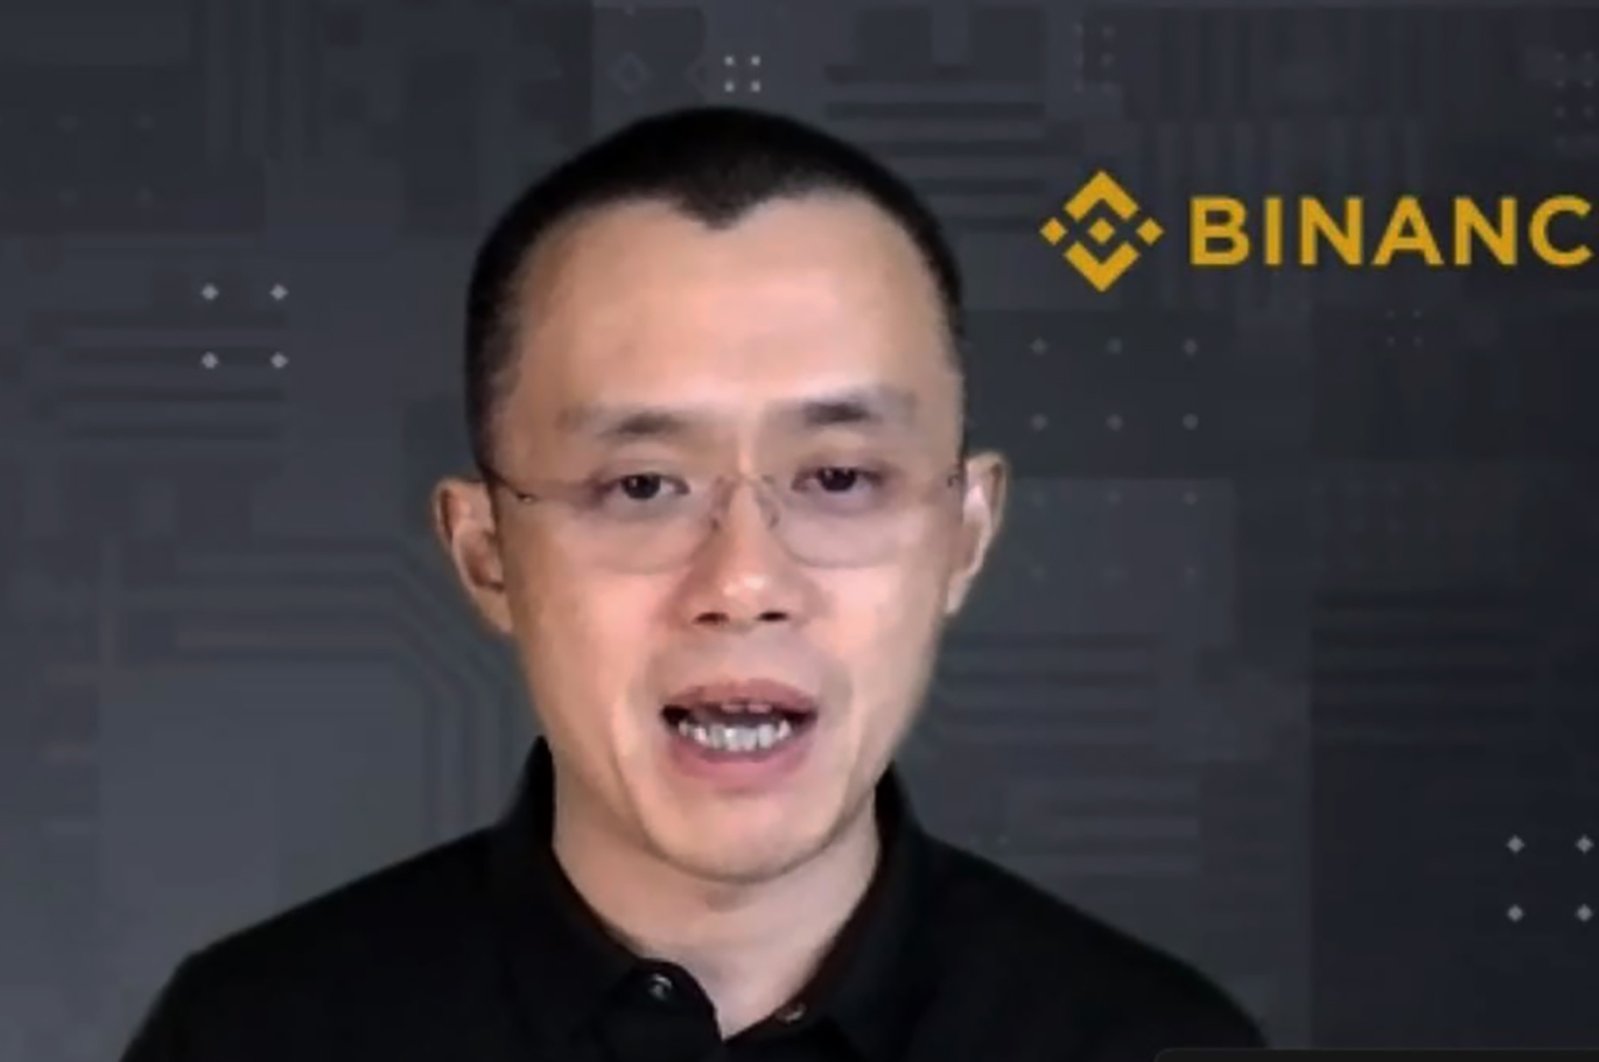 Binance CEO Changpeng Zhao answers a question during a Zoom meeting interview with The Associated Press, Nov. 16, 2021. (AP Photo)